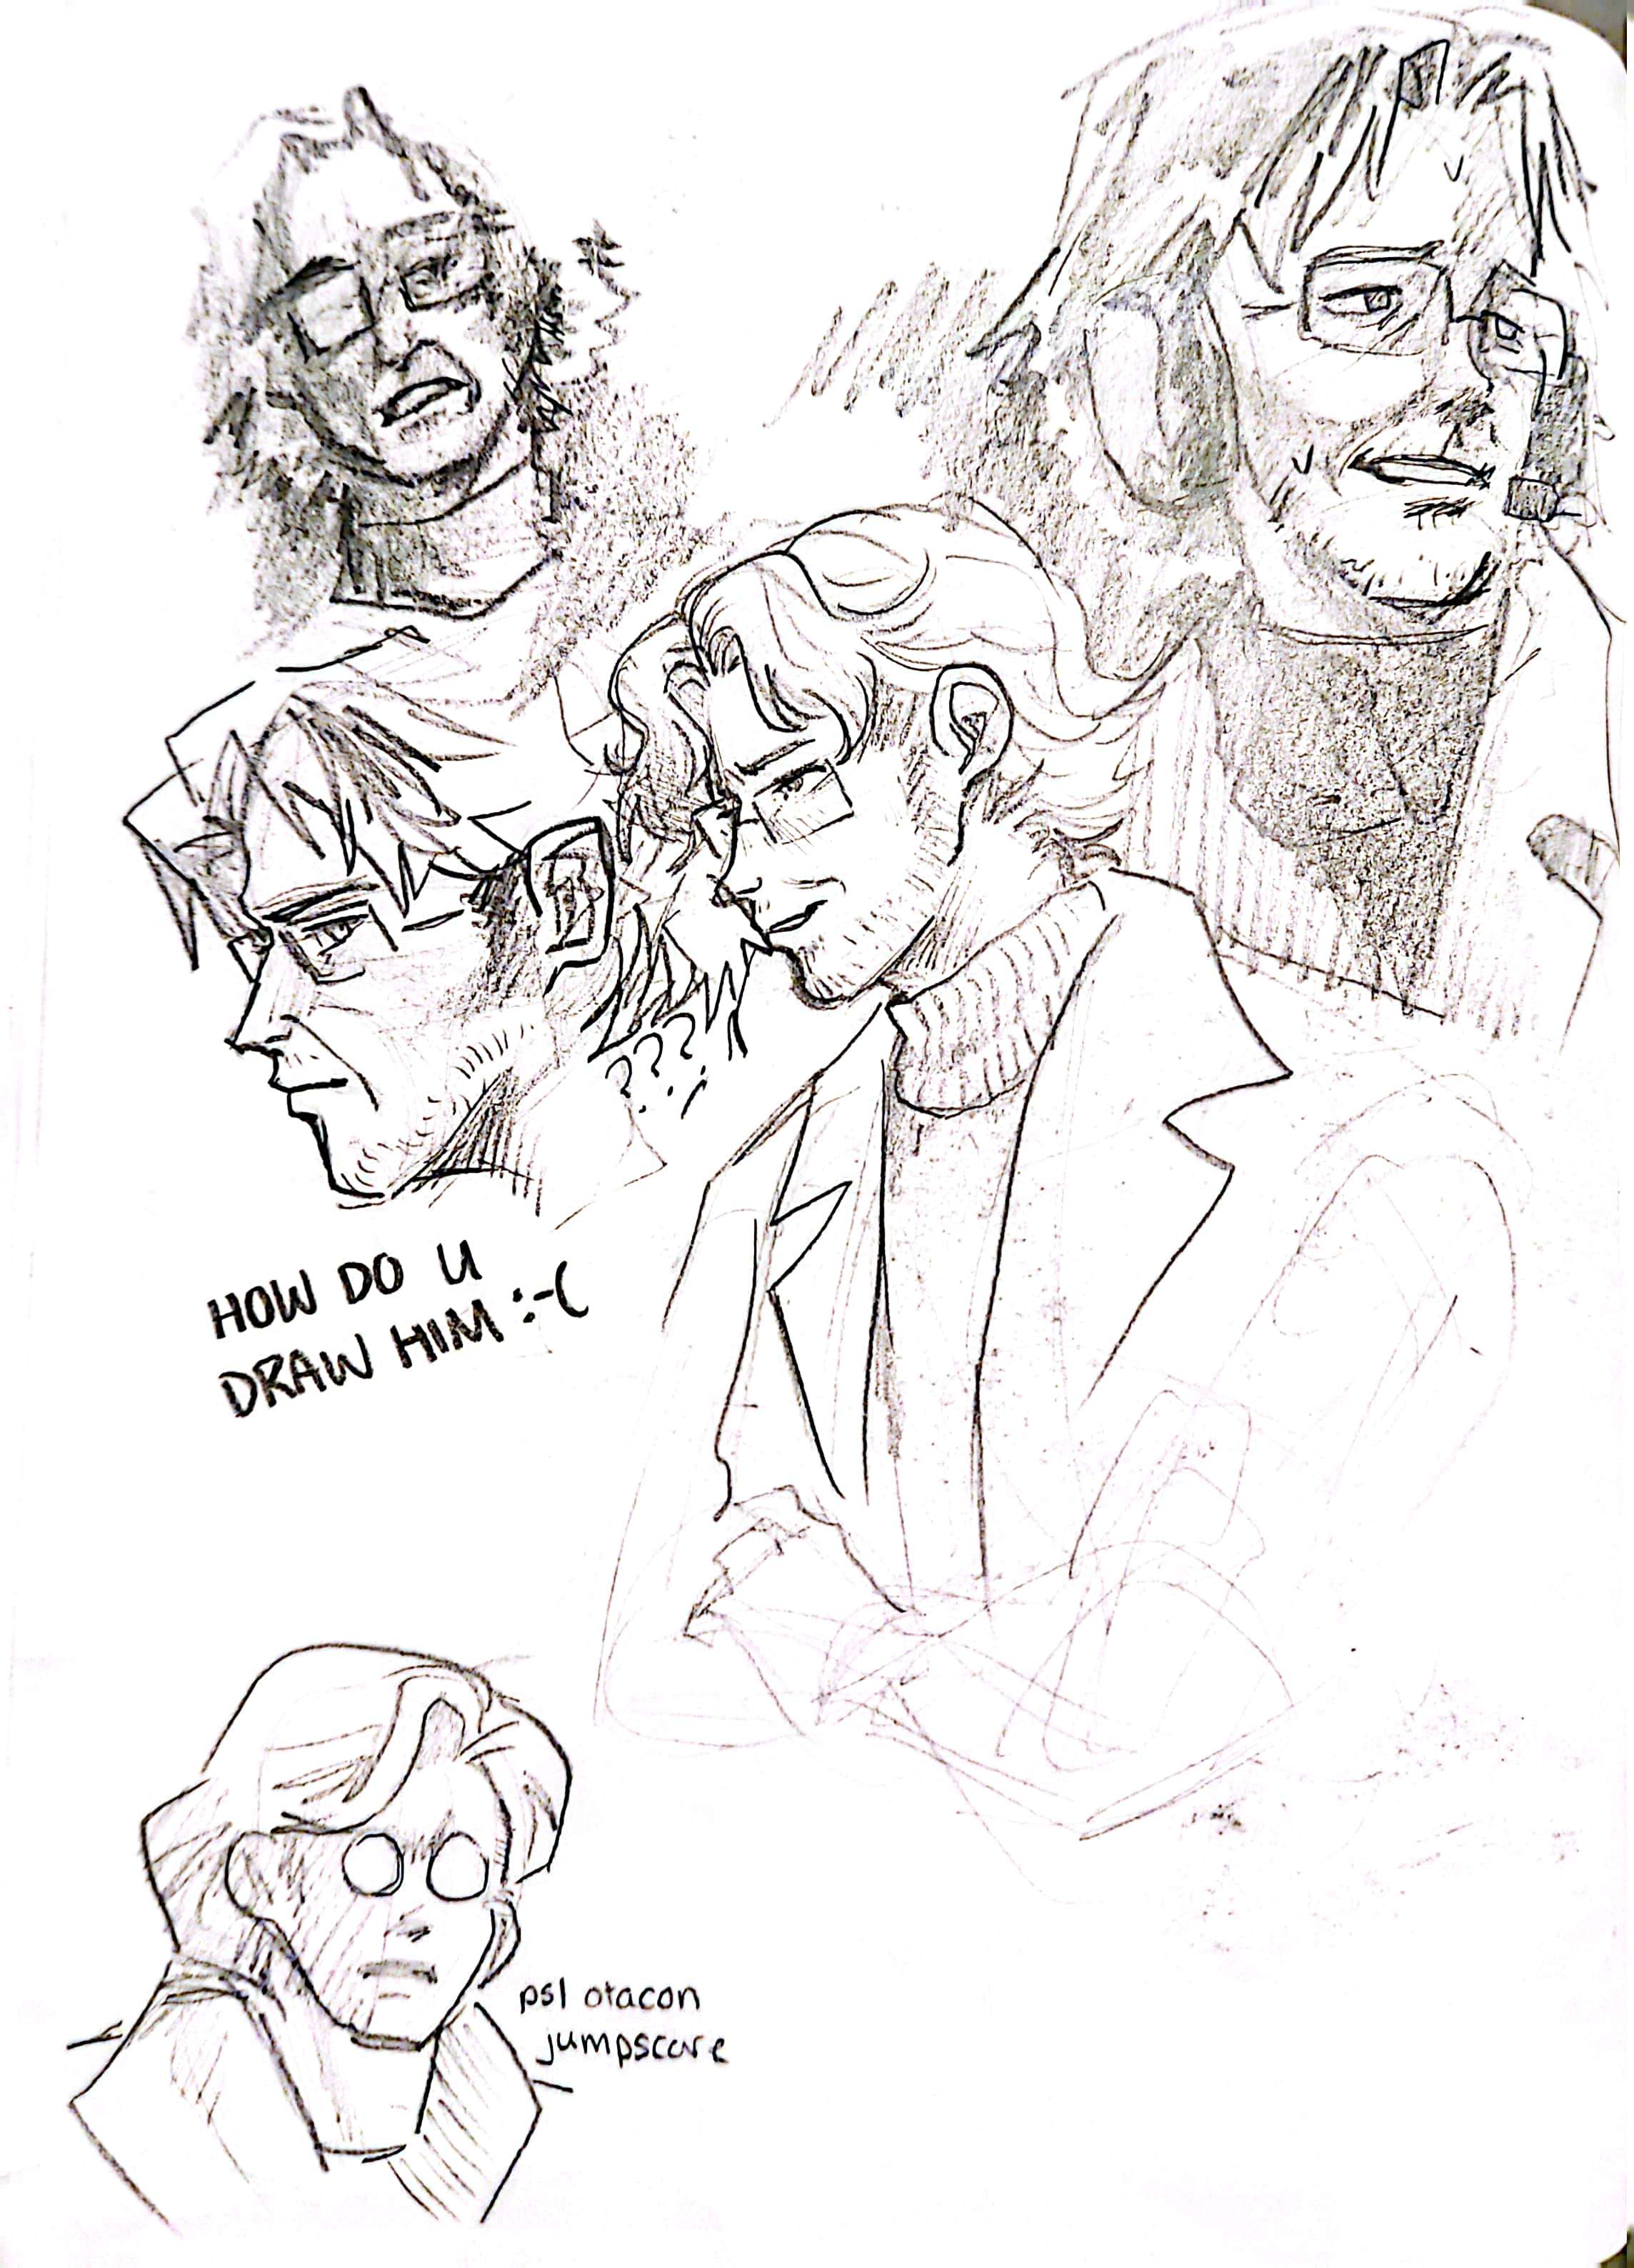 A page full of Otacon studies captioned 'HOW DO U DRAW HIM :-(' there's a sketch of his MGS1 model at the bottom captioned 'PS1 Otacon jumpscare'